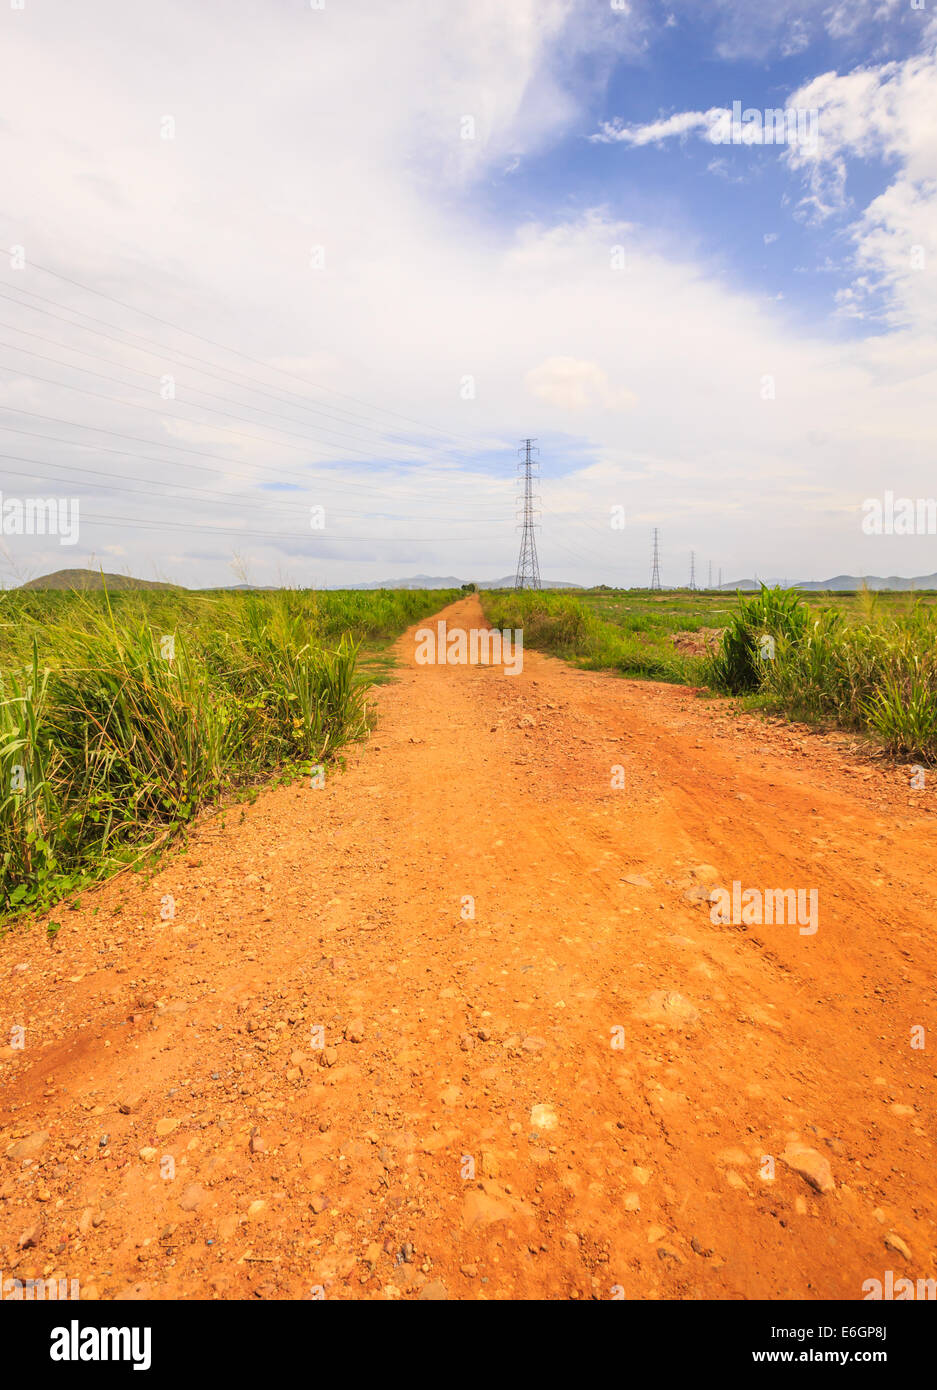 This red soil unpaved road leads us into the middle of nowhere. Stock Photo